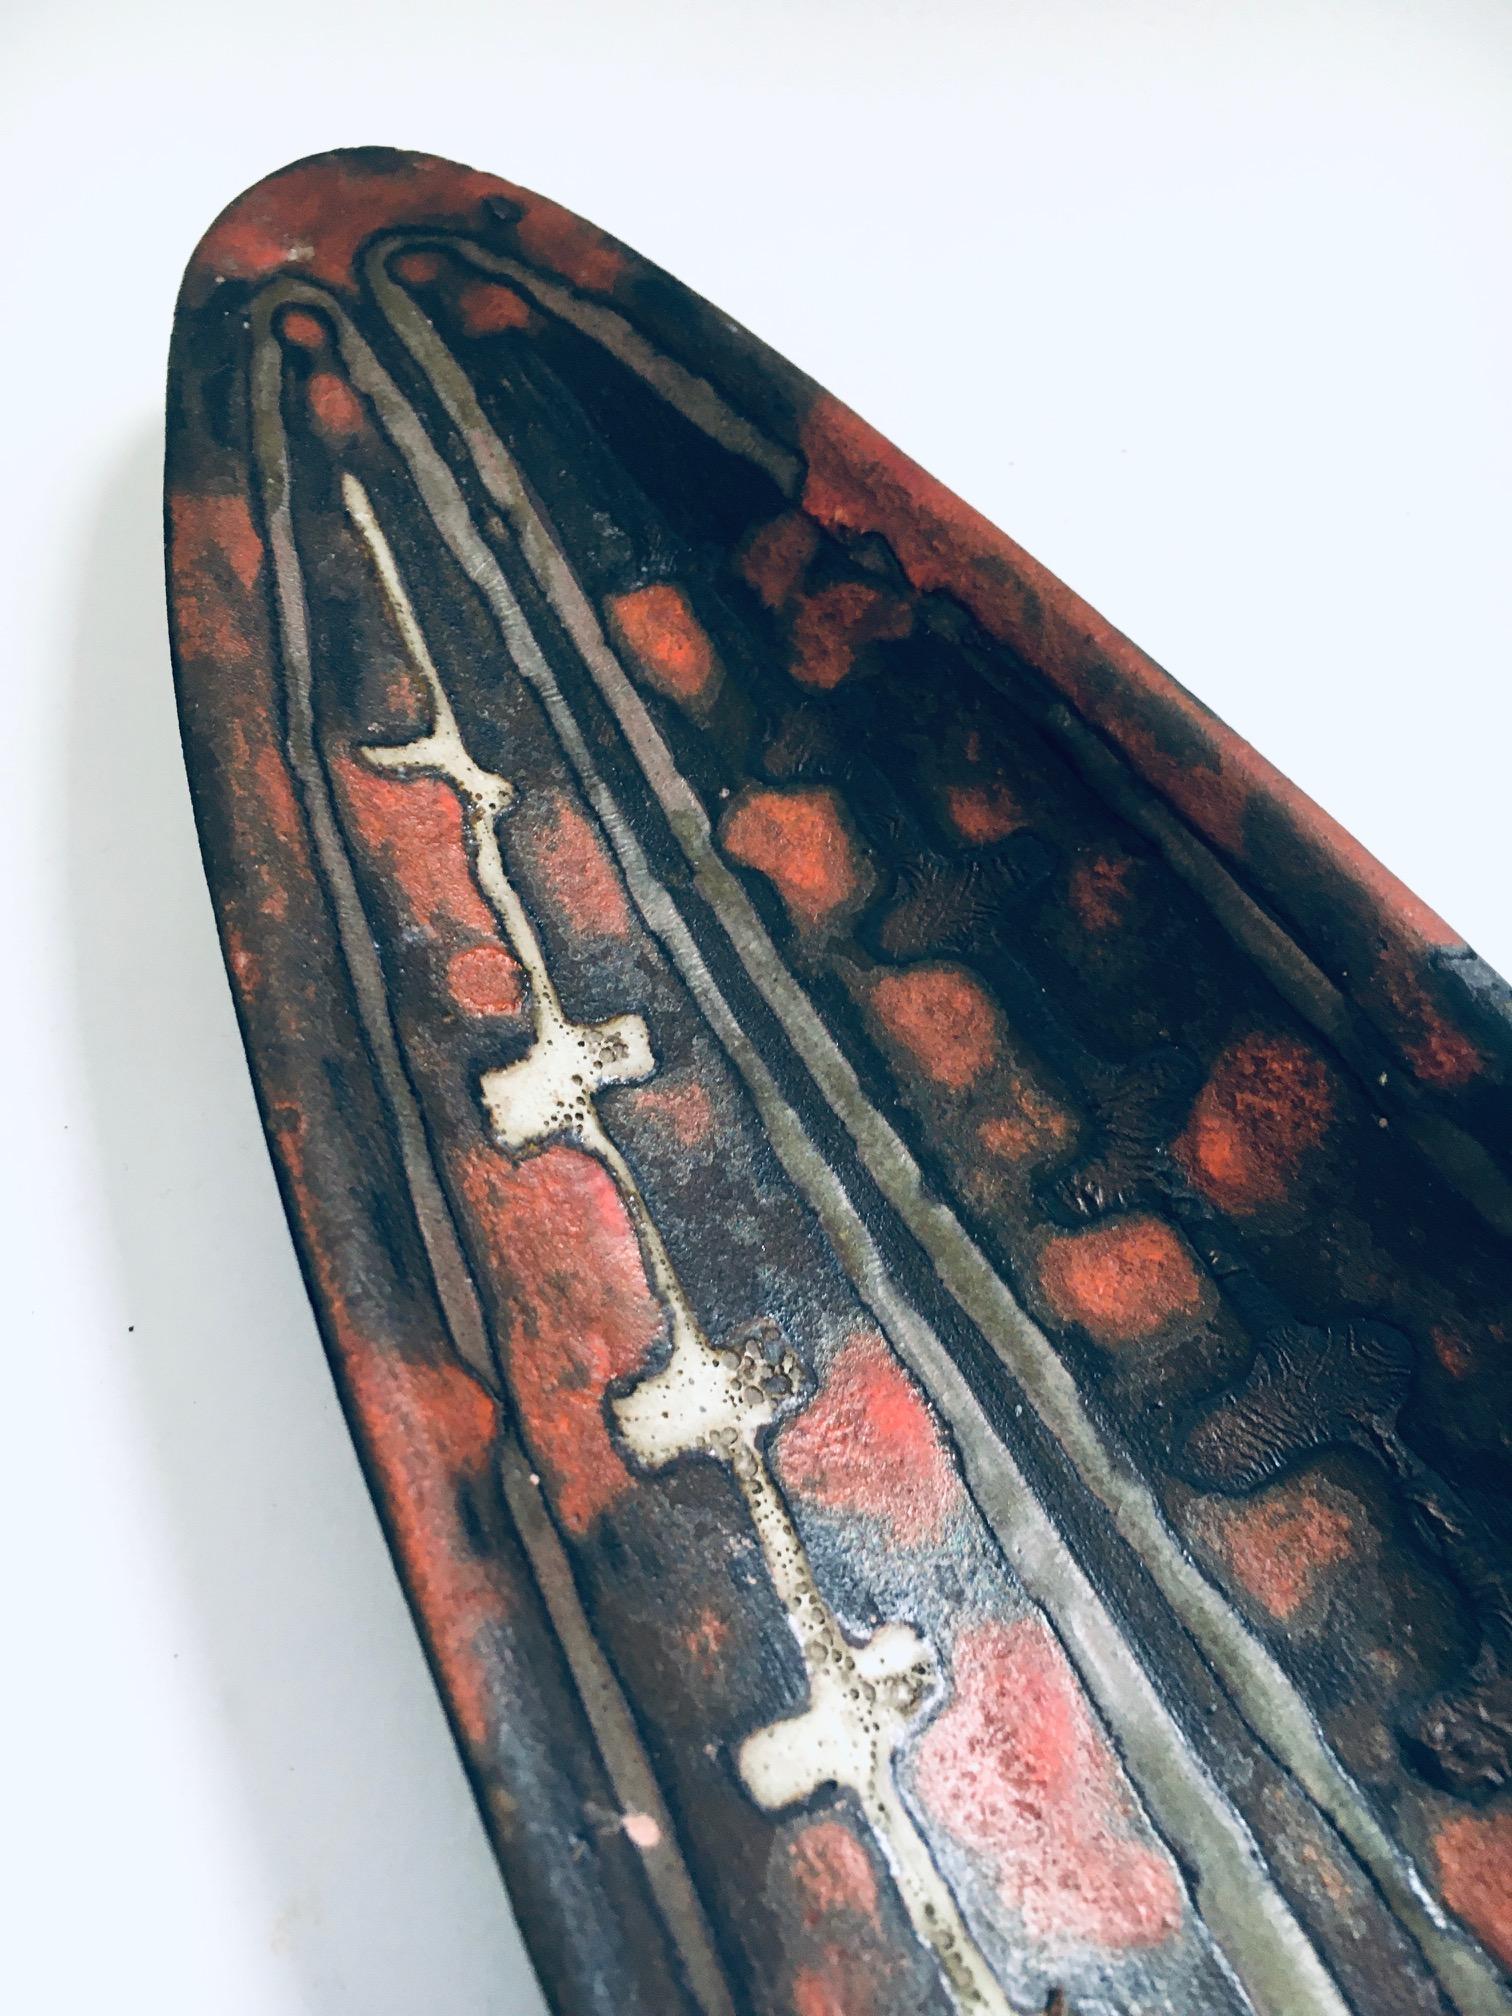 Abstract Art Ceramic Surfboard Bowl Dish by Perignem Studio, Belgium 1960's For Sale 2